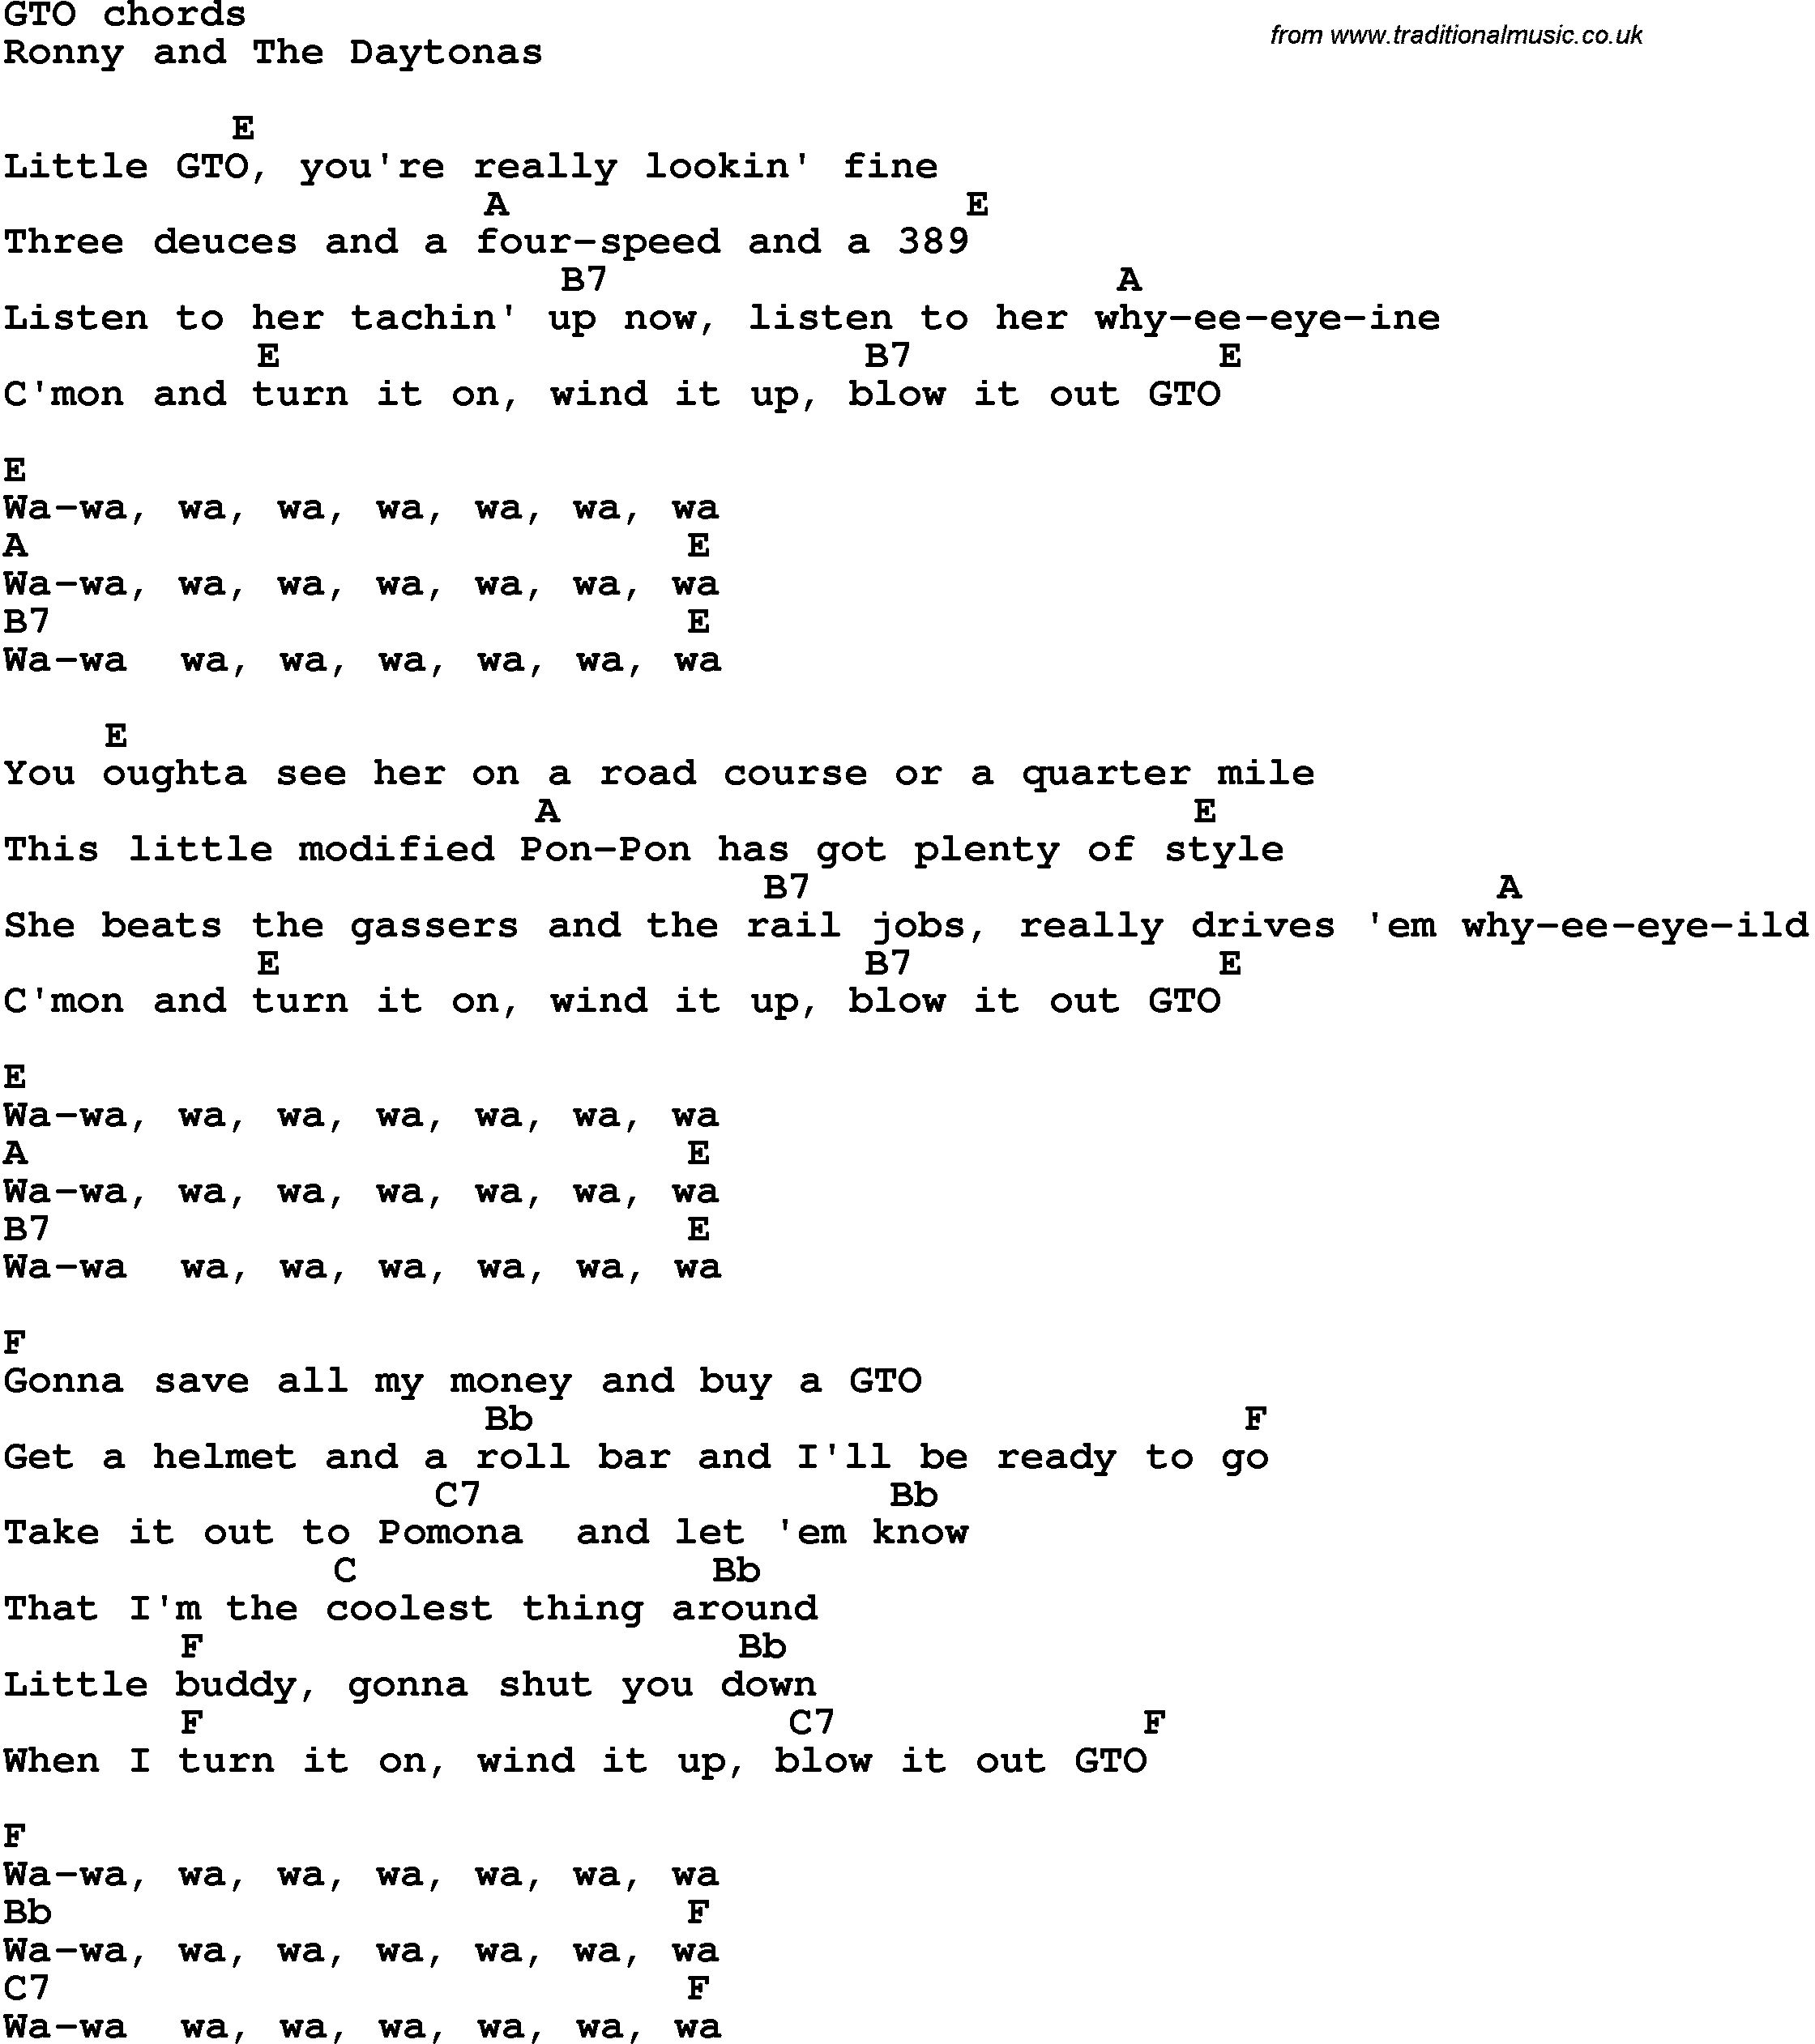 Song Lyrics with guitar chords for Gto - Ronny And The Daytonas